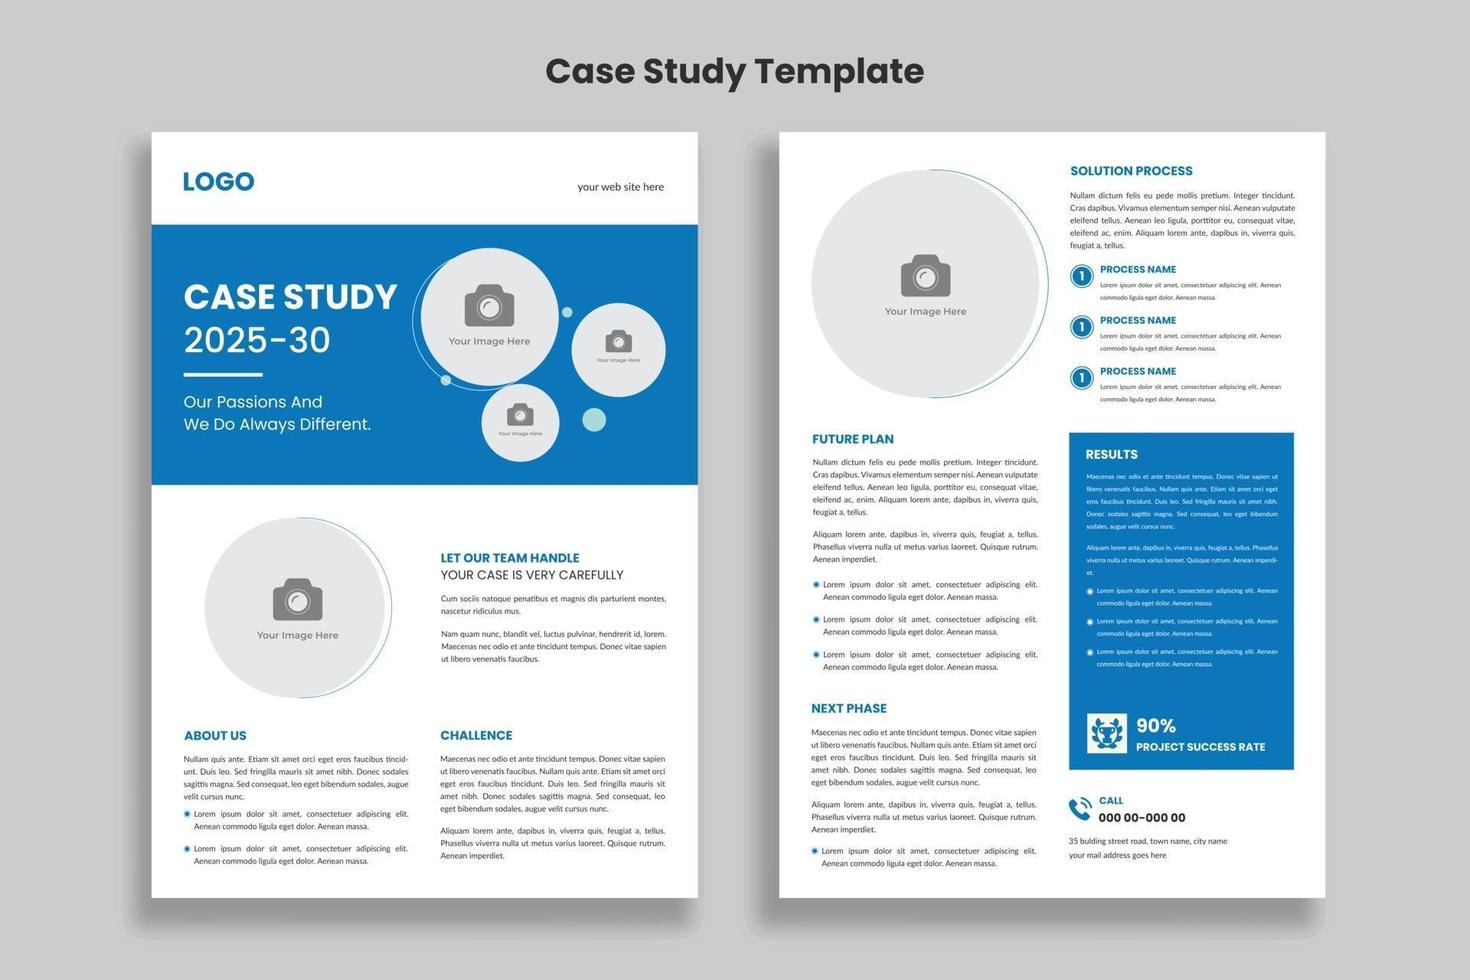 Case Study Template, Double Side Flyer, Poster Template design vector